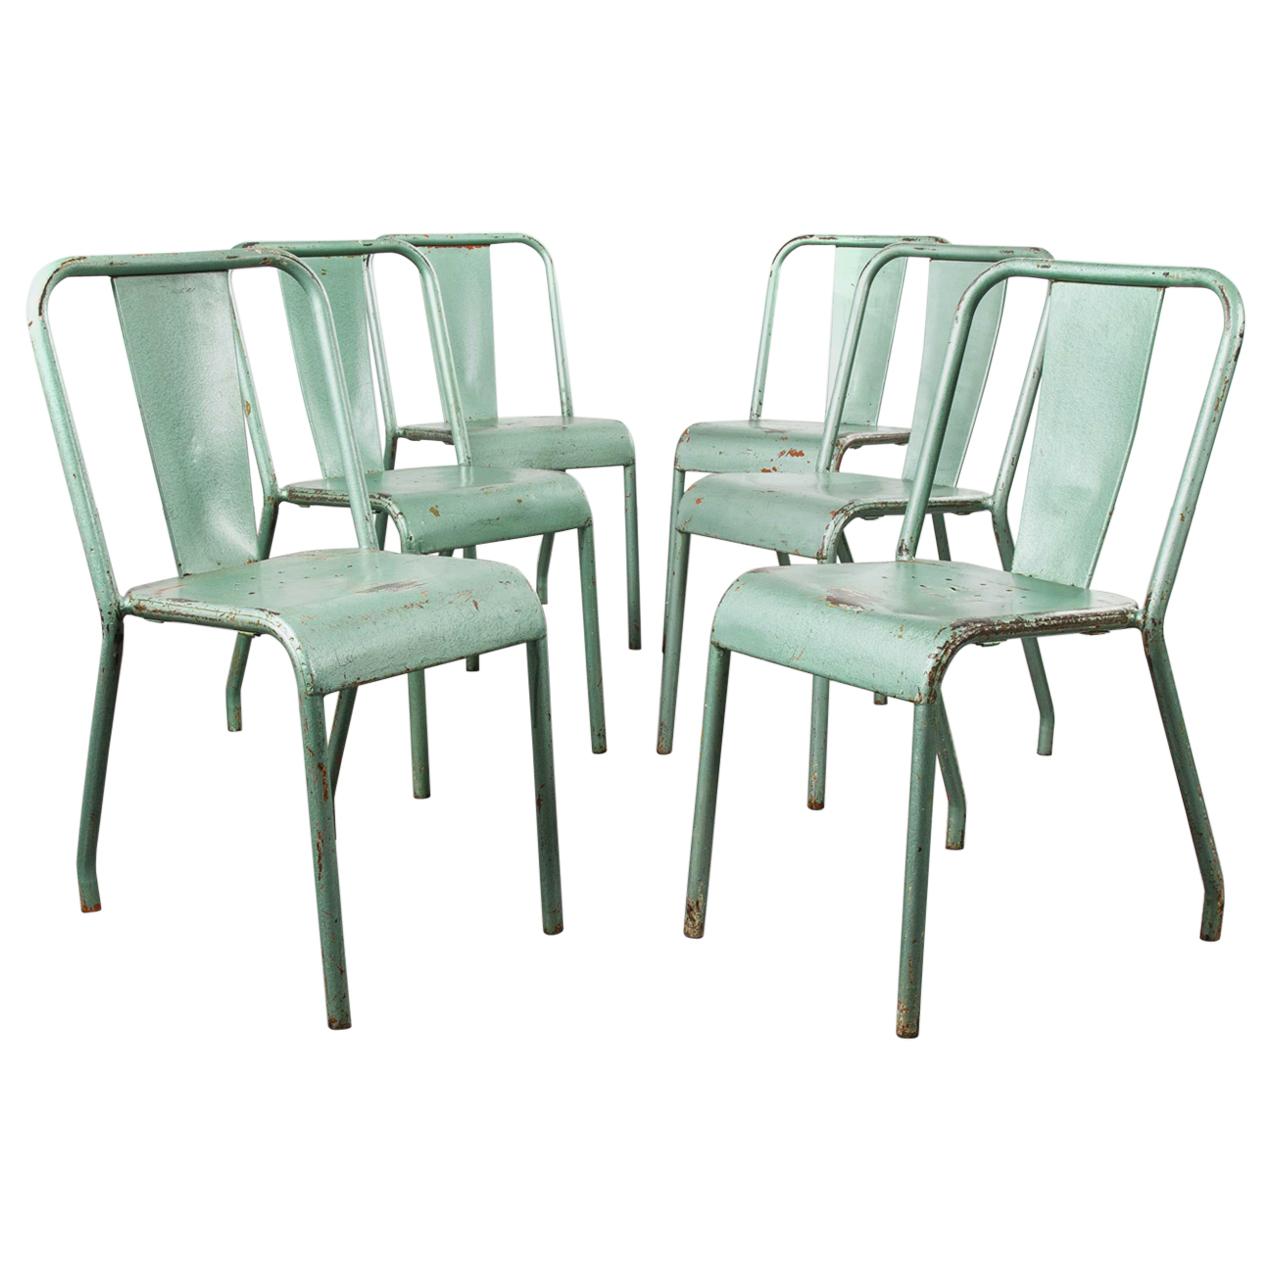 1960s Original French Tolix T37 Metal Cafe Outdoor Dining Chairs Ð, Set of Six